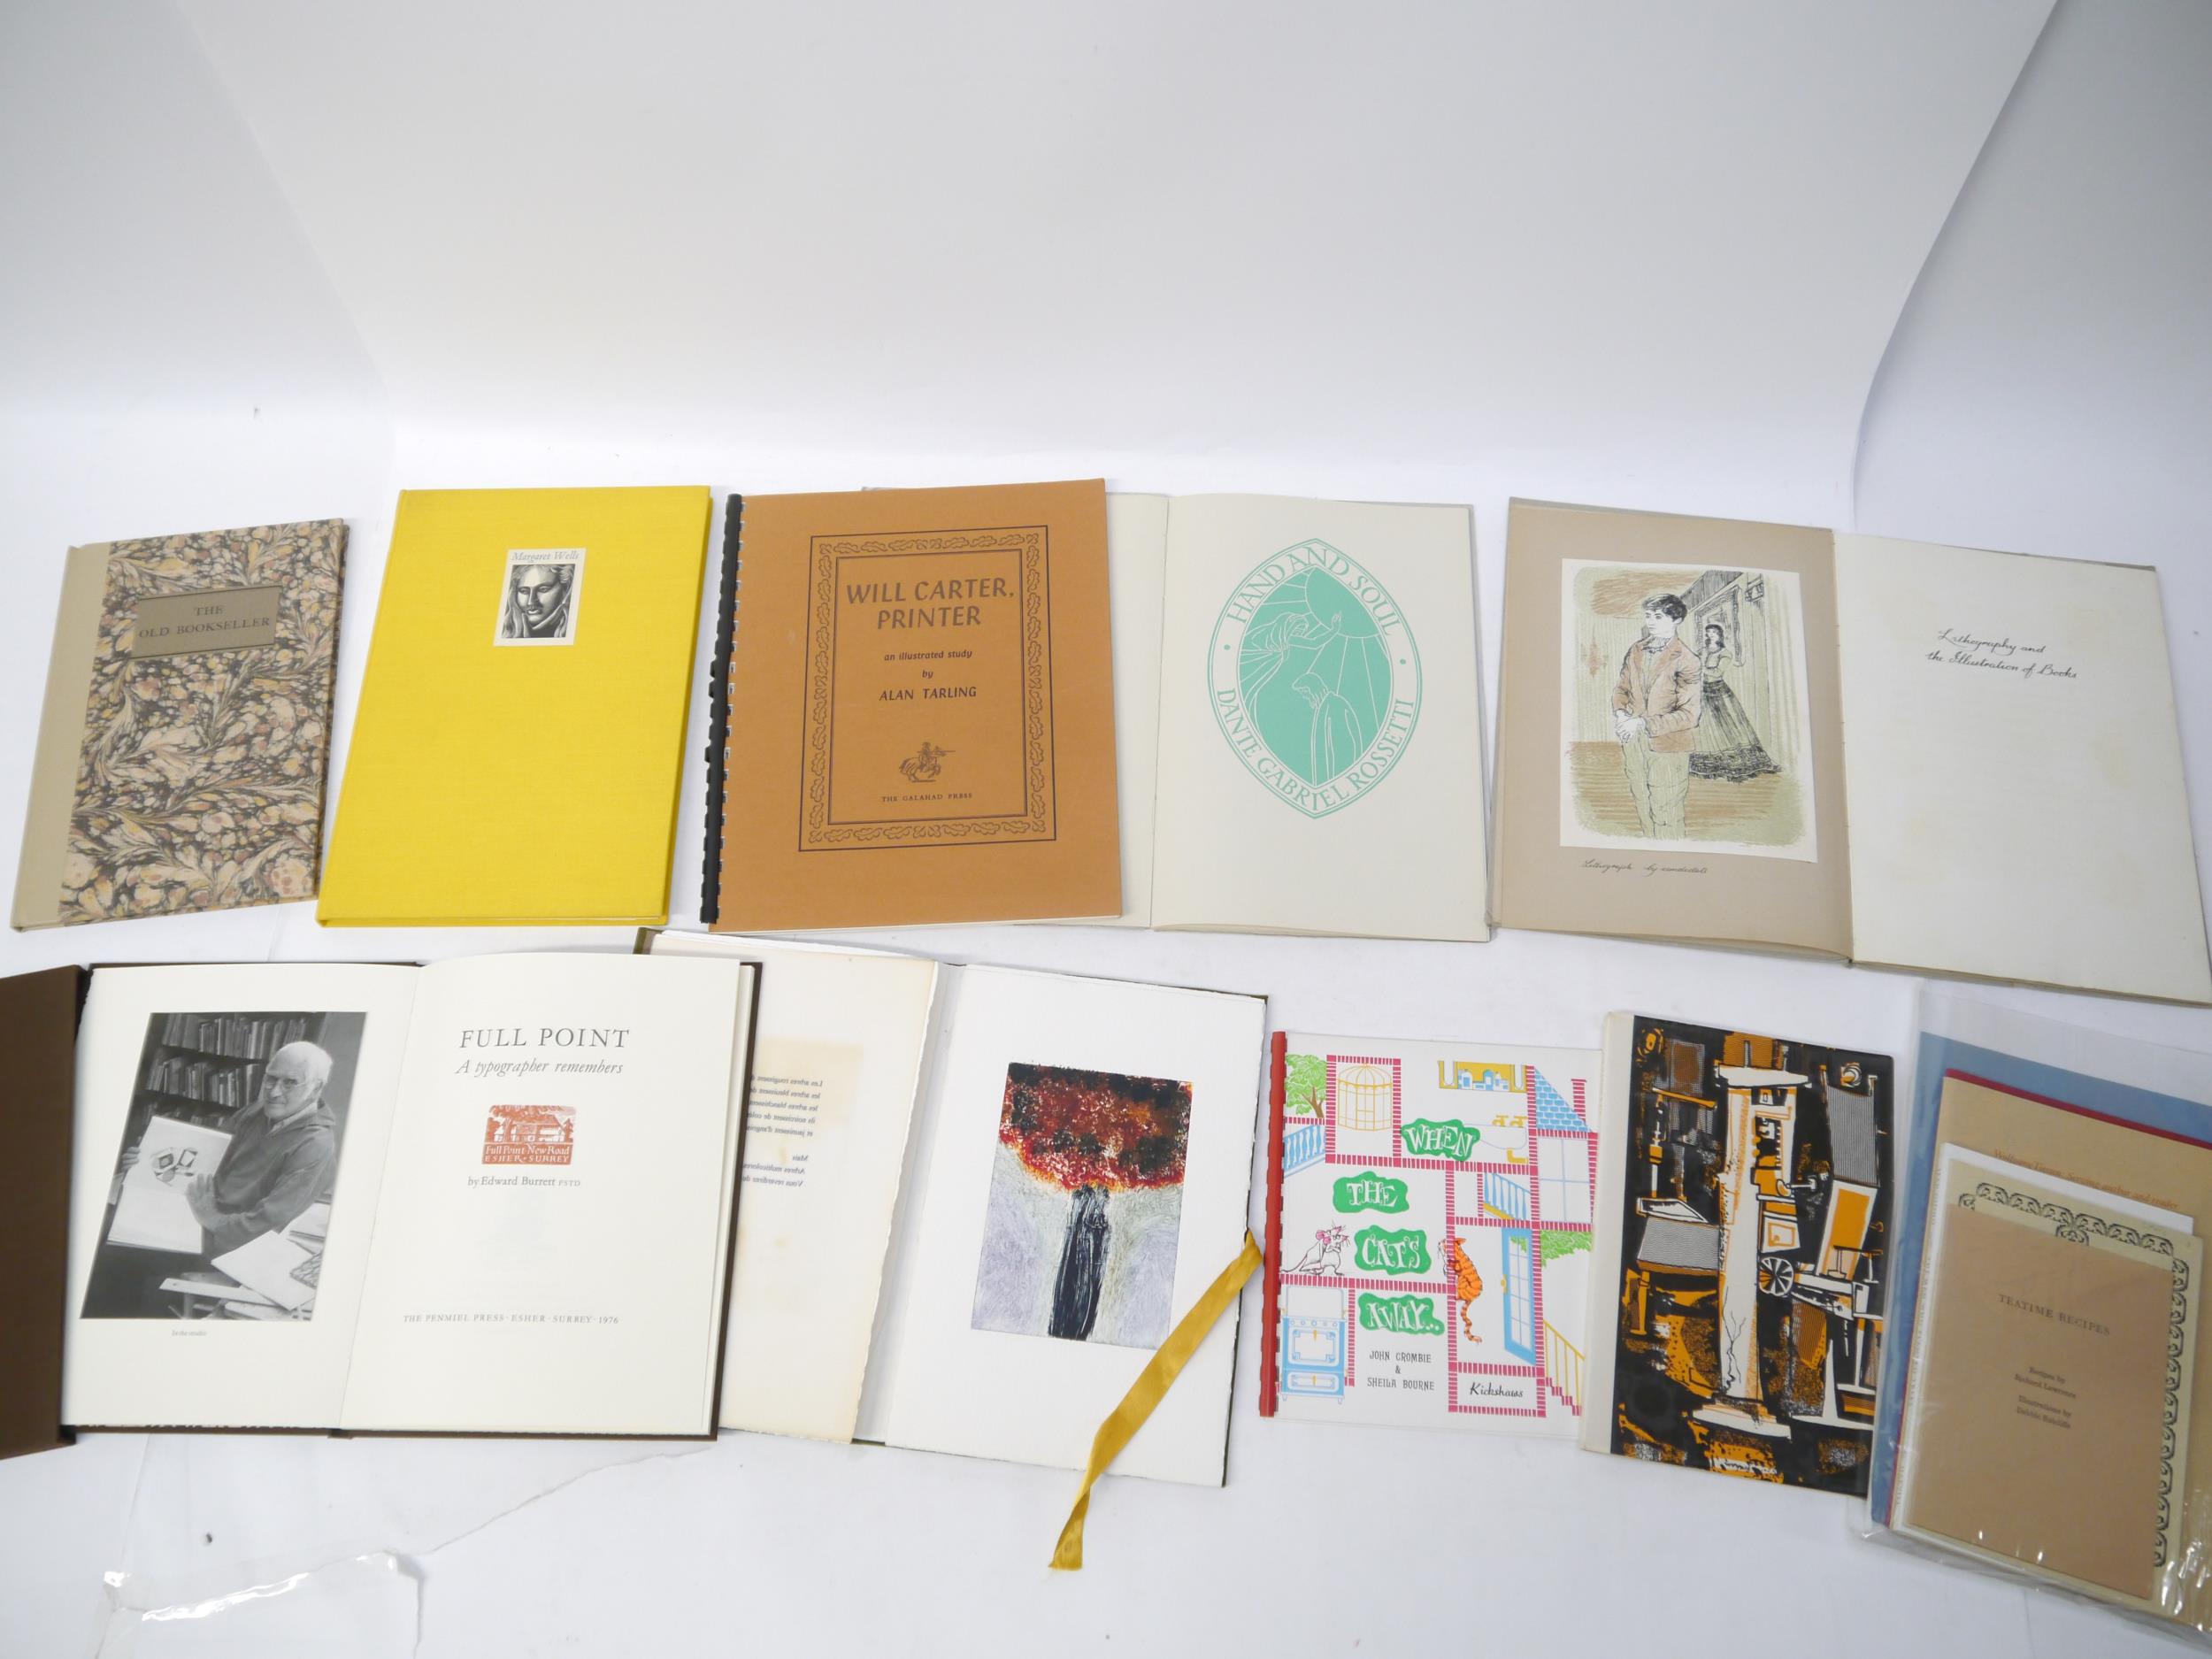 (Private Press, Typography), a collection 15 private press and typography related titles,